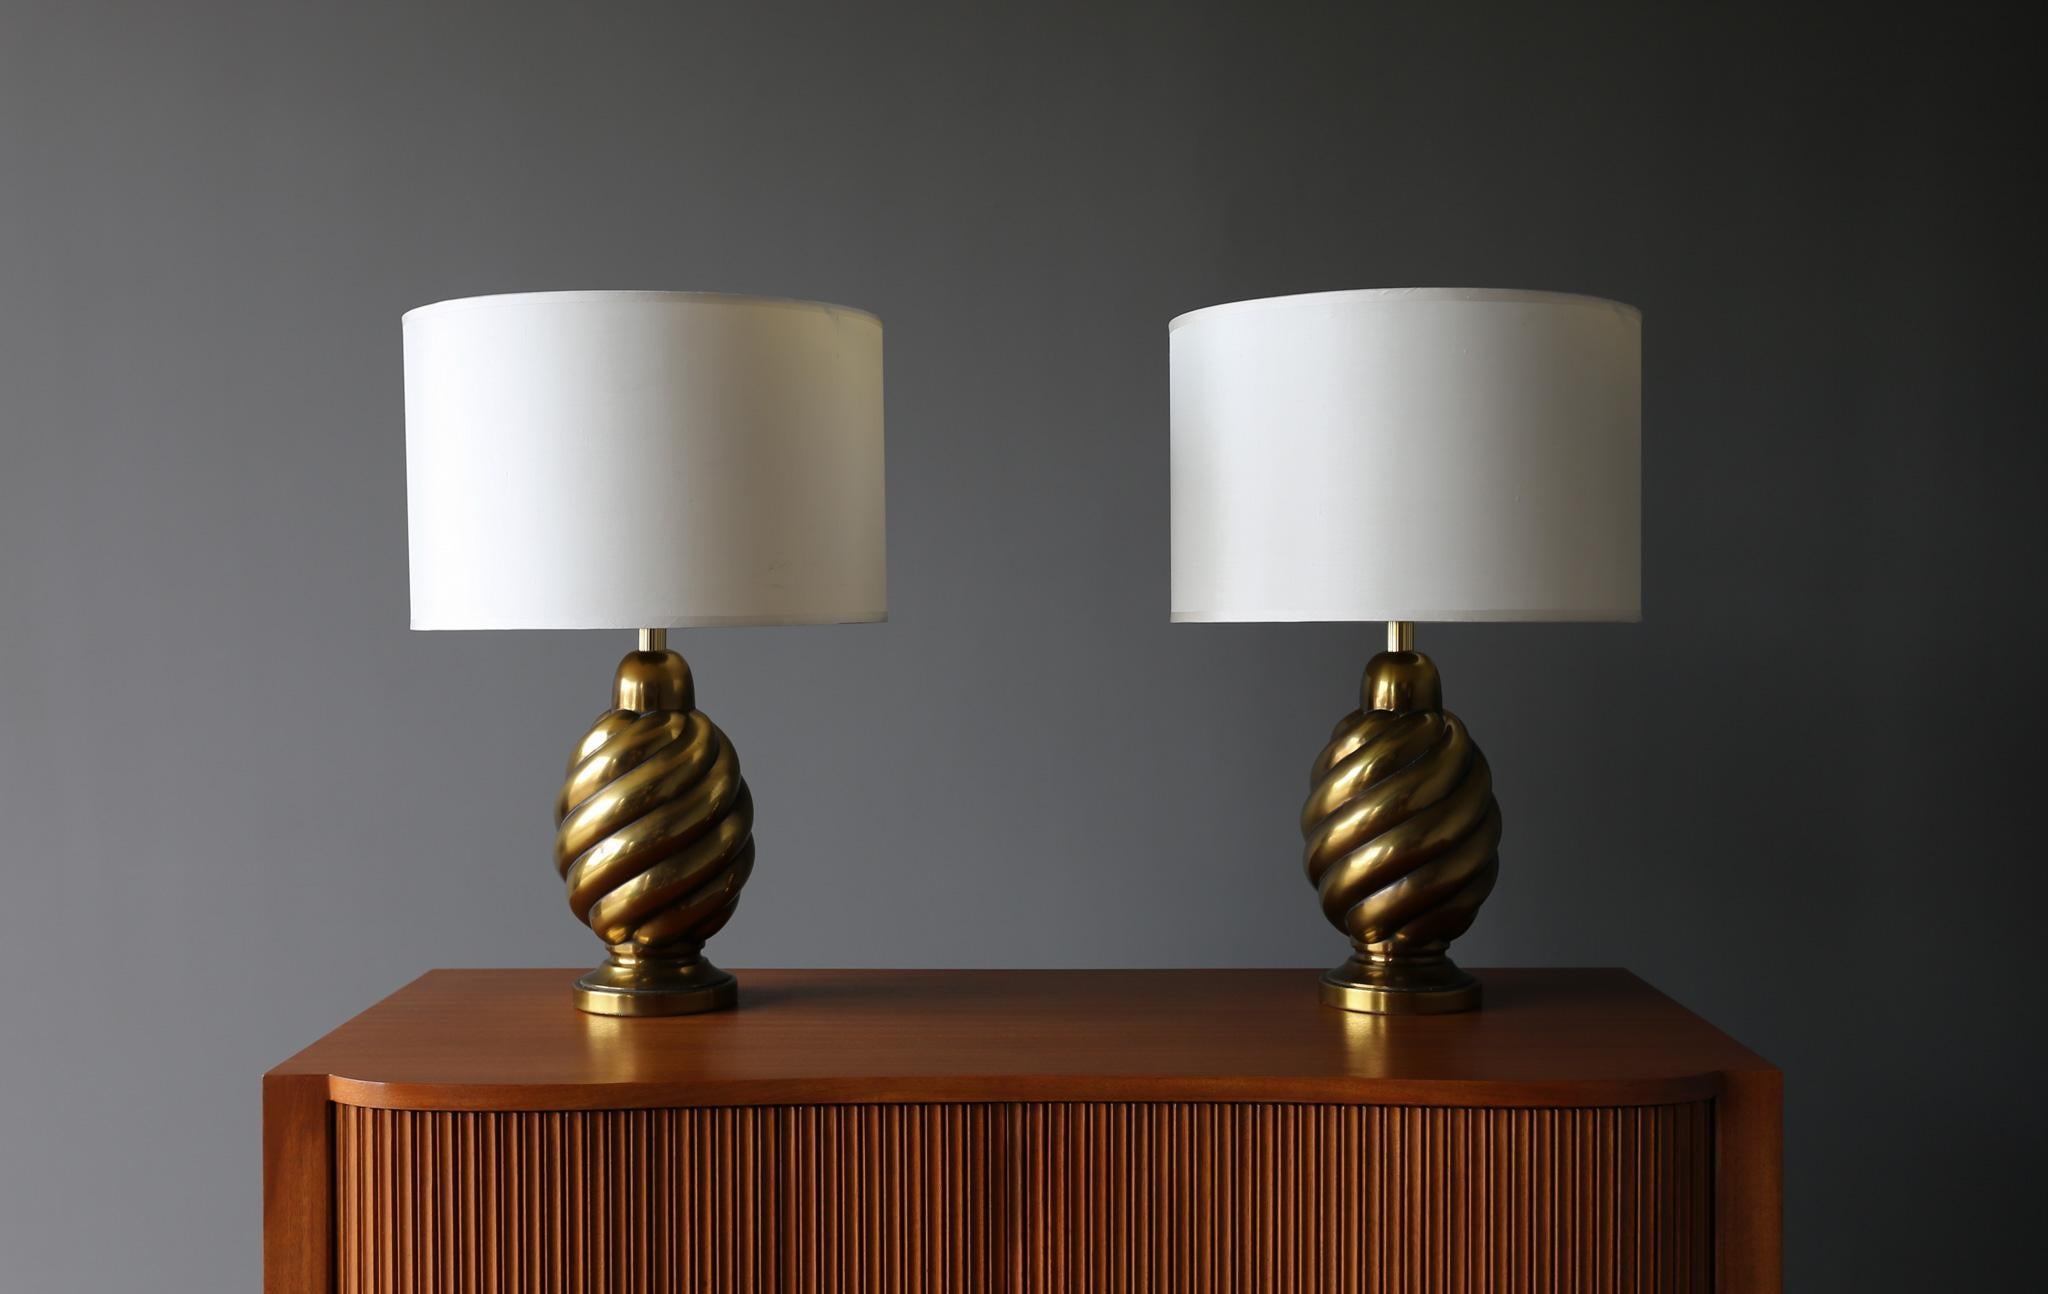 Westwood Industries Aged Brass Lamps, United States, c.1970.  

Measures: 
18